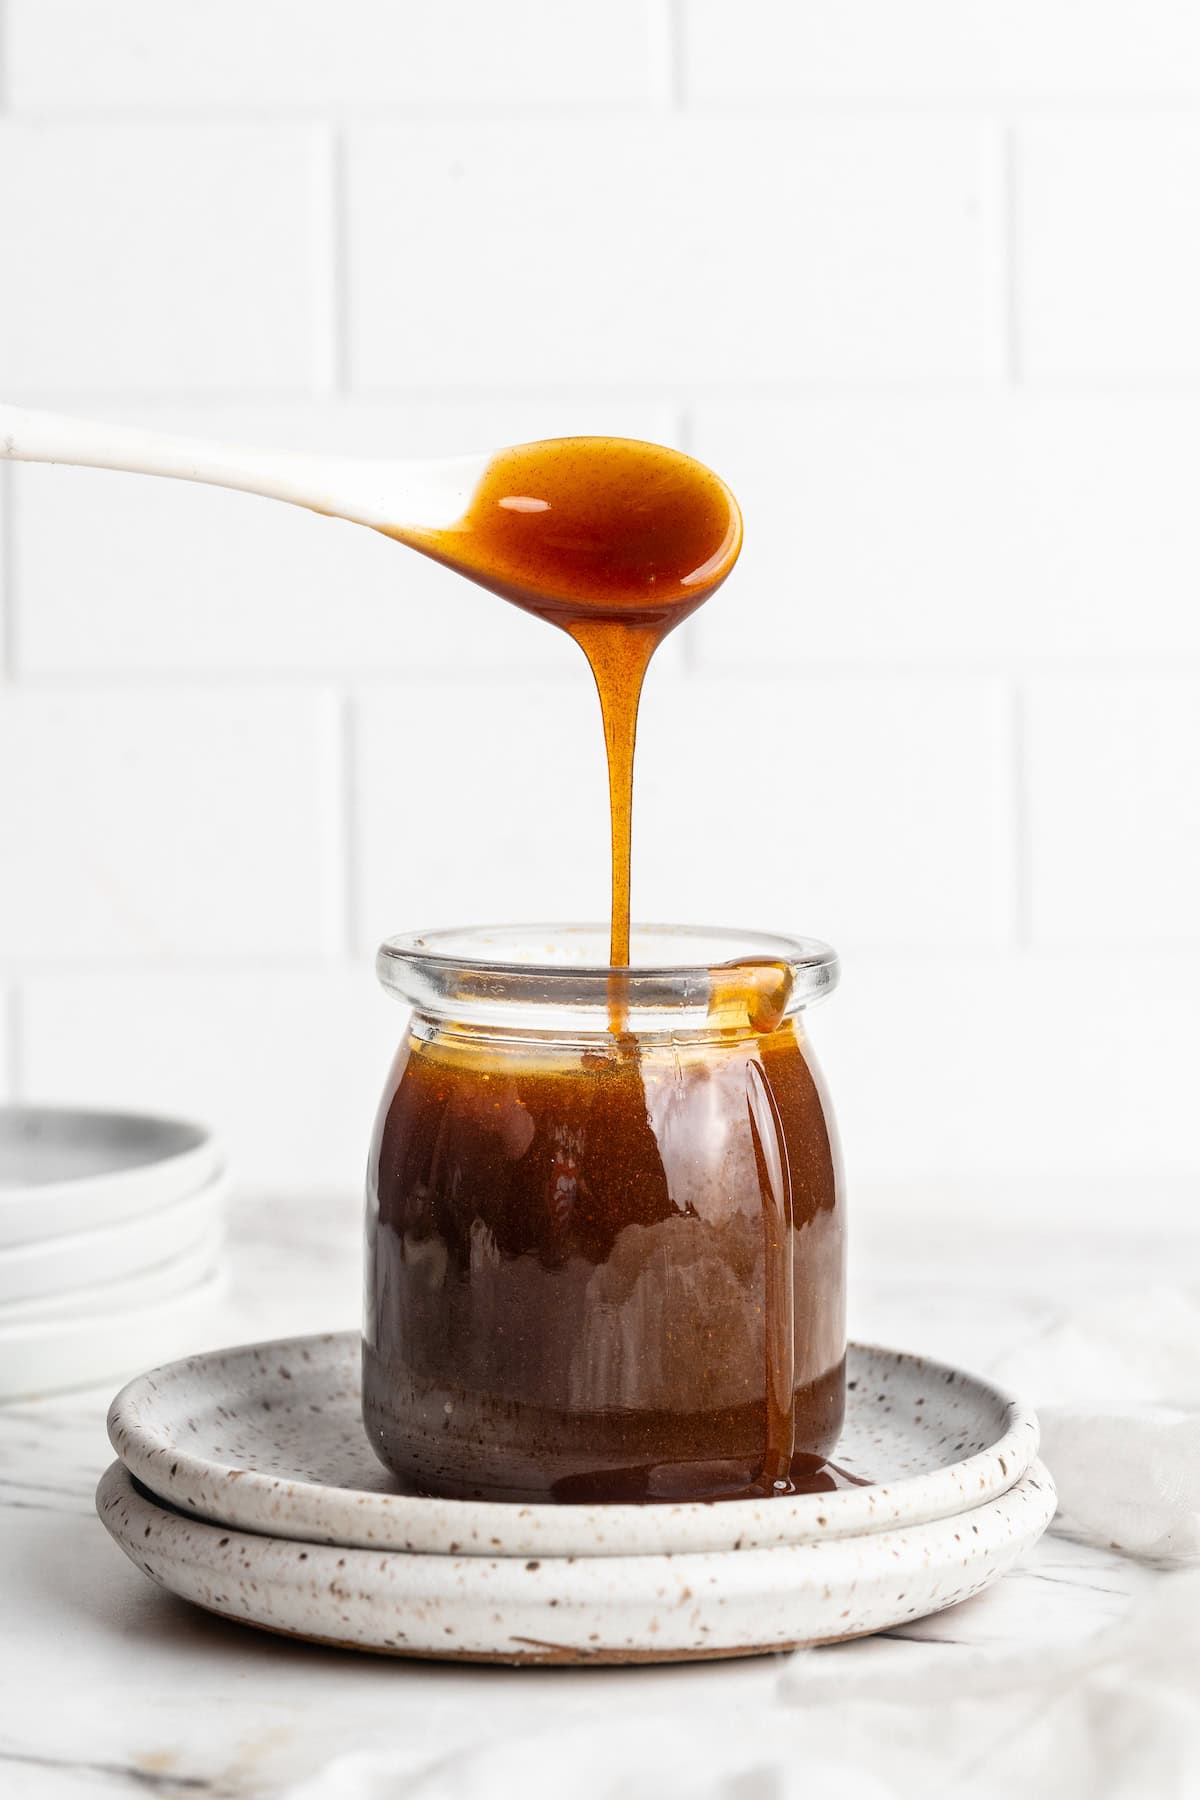 Spoon drizzling date syrup into glass jar